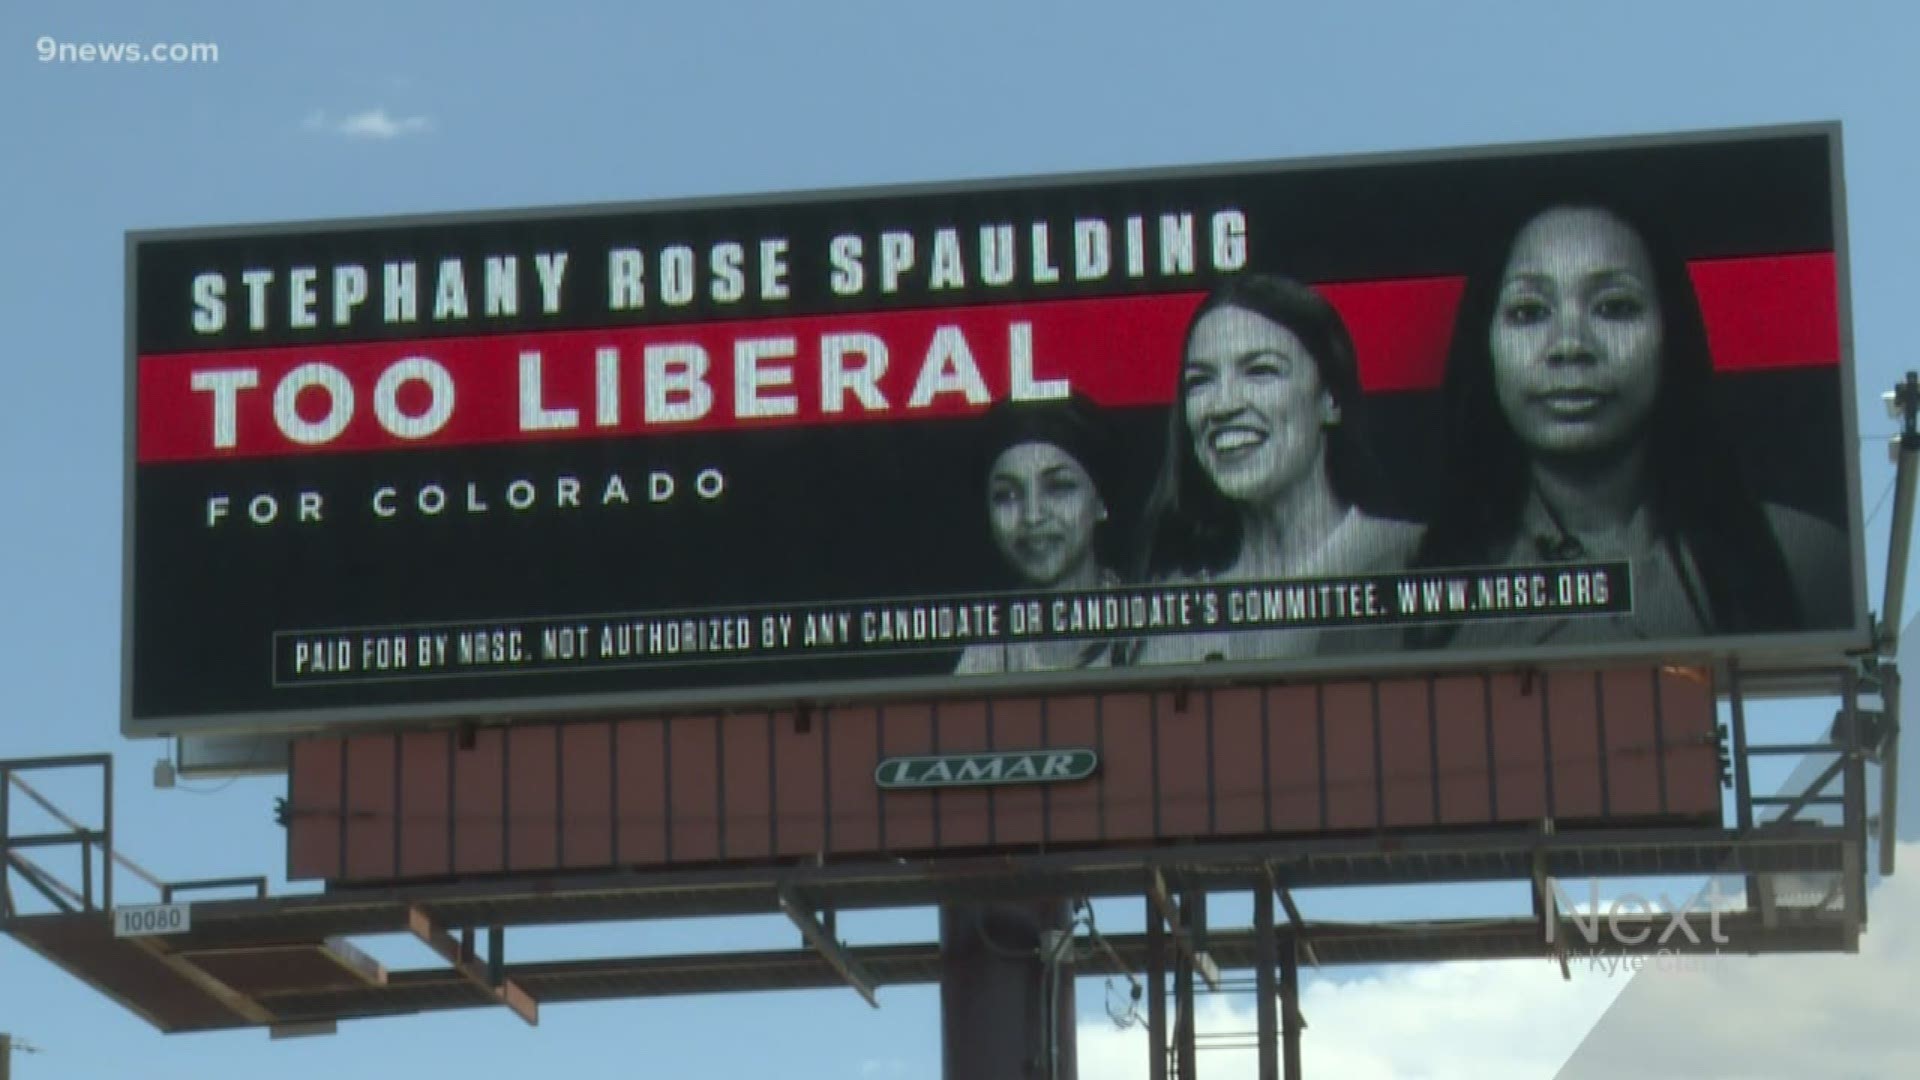 The NRSC (National Republican Senatorial Committee) is focusing on Spaulding, a Democrat attempting to unseat Sen. Cory Gardner, by saying she's "too liberal." The NRSC is also running these billboards in other states with competitive Democratic primaries like Georgia, North Carolina and Maine.